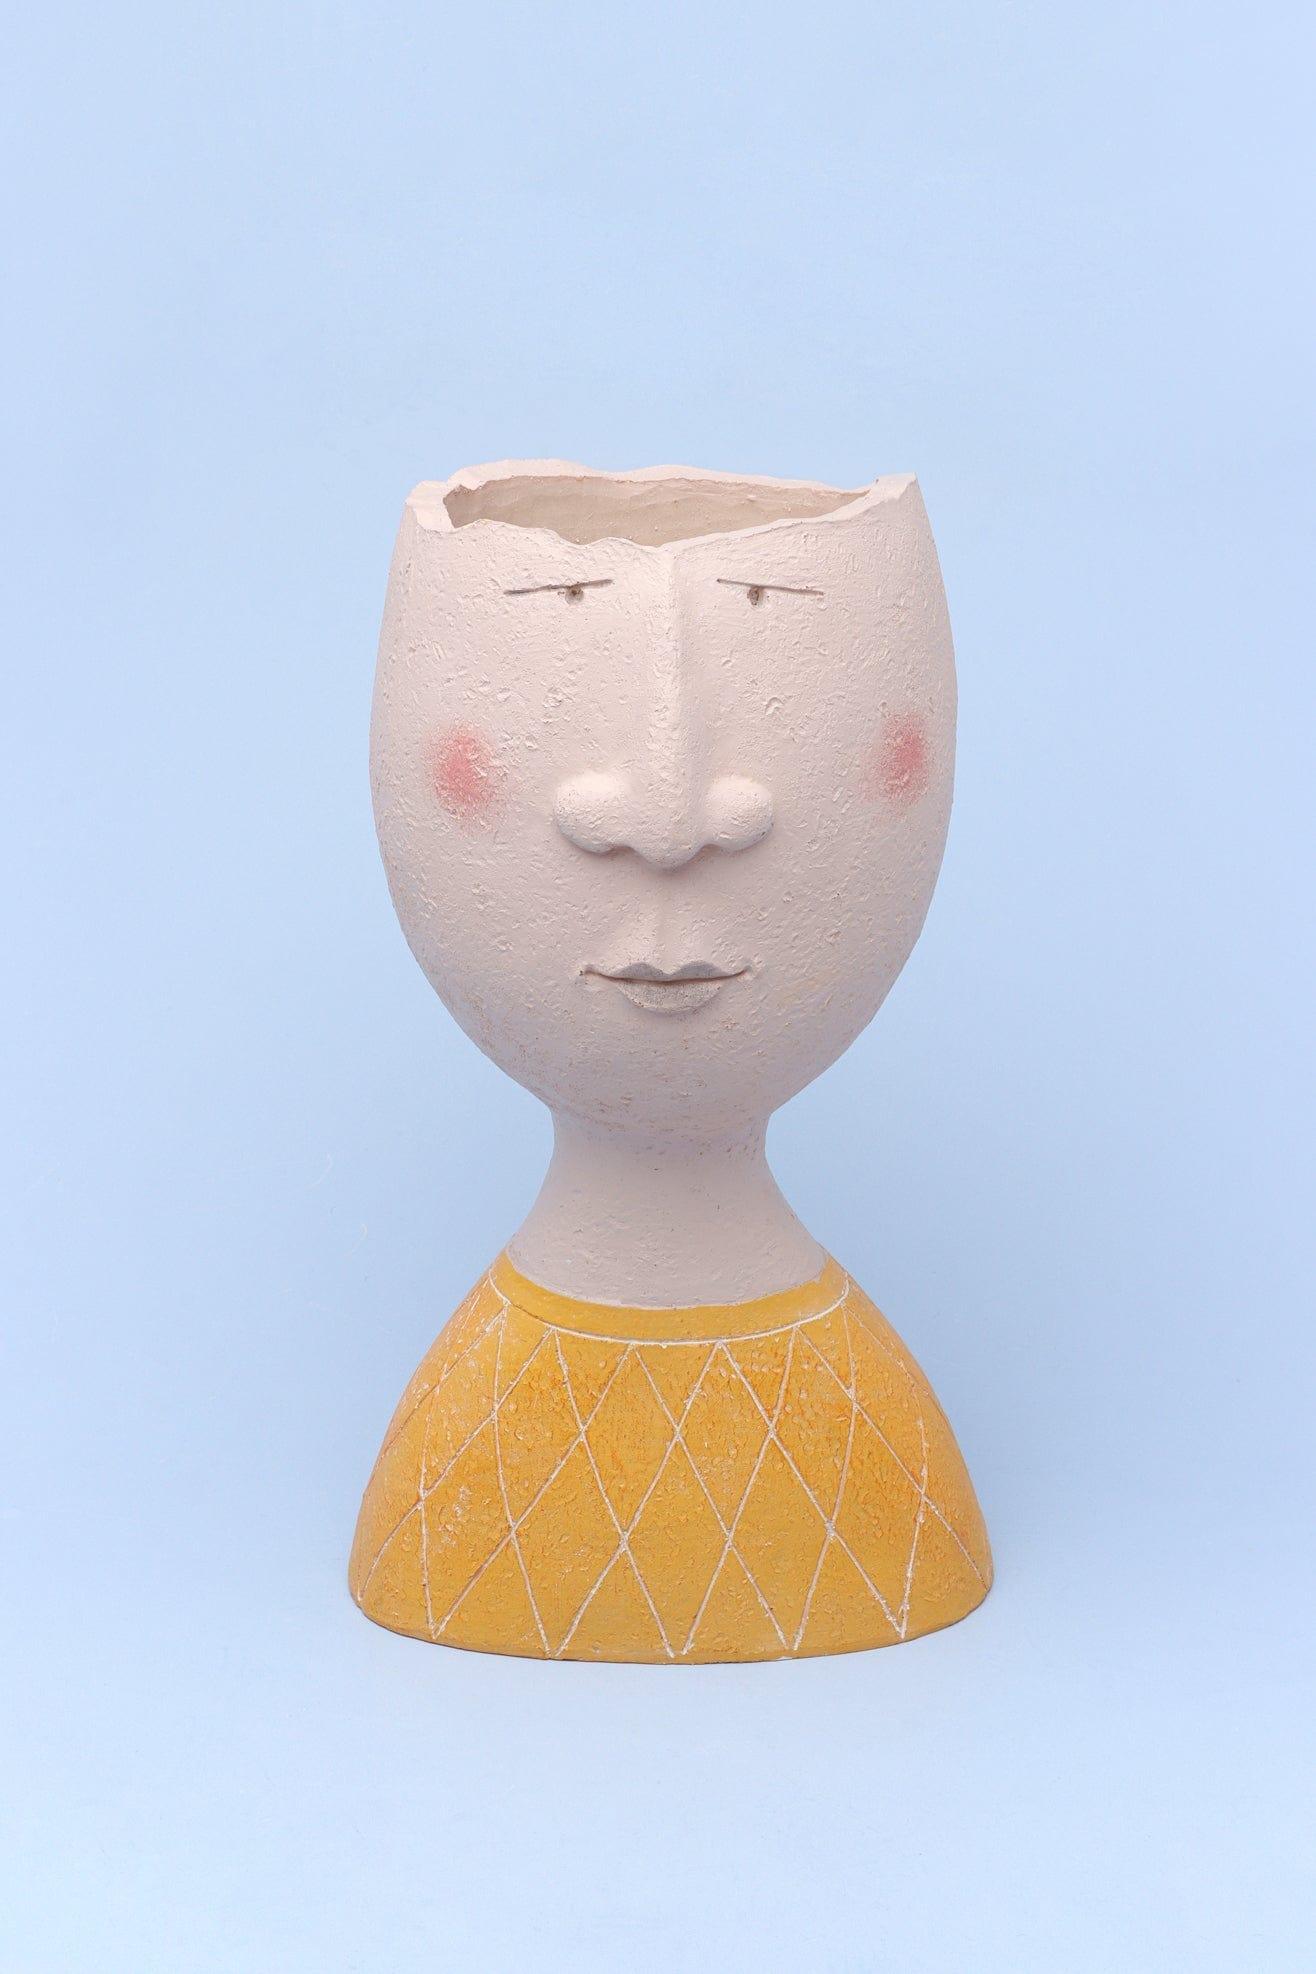 G Decor Vases Yellow Resin Characteristic Human Family Faces Flower Plant Pot Planter Or Home Decoration Vase